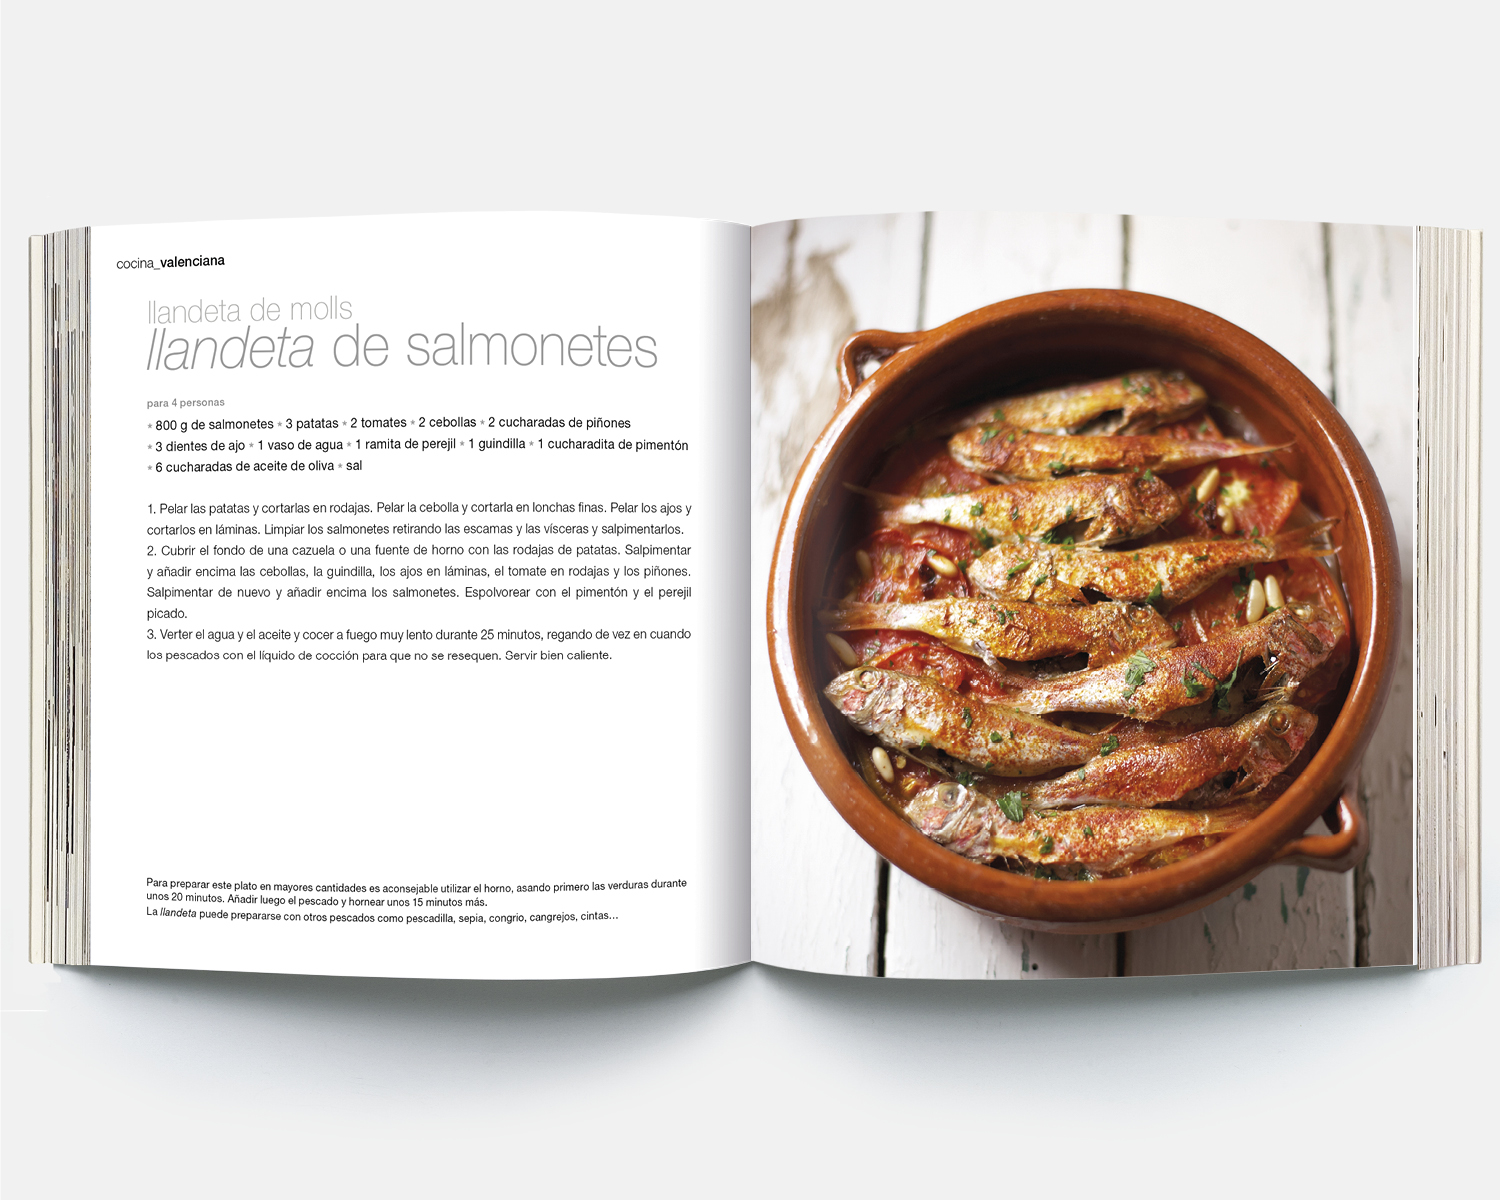 Valencian gastronomy and cuisine CUV 10